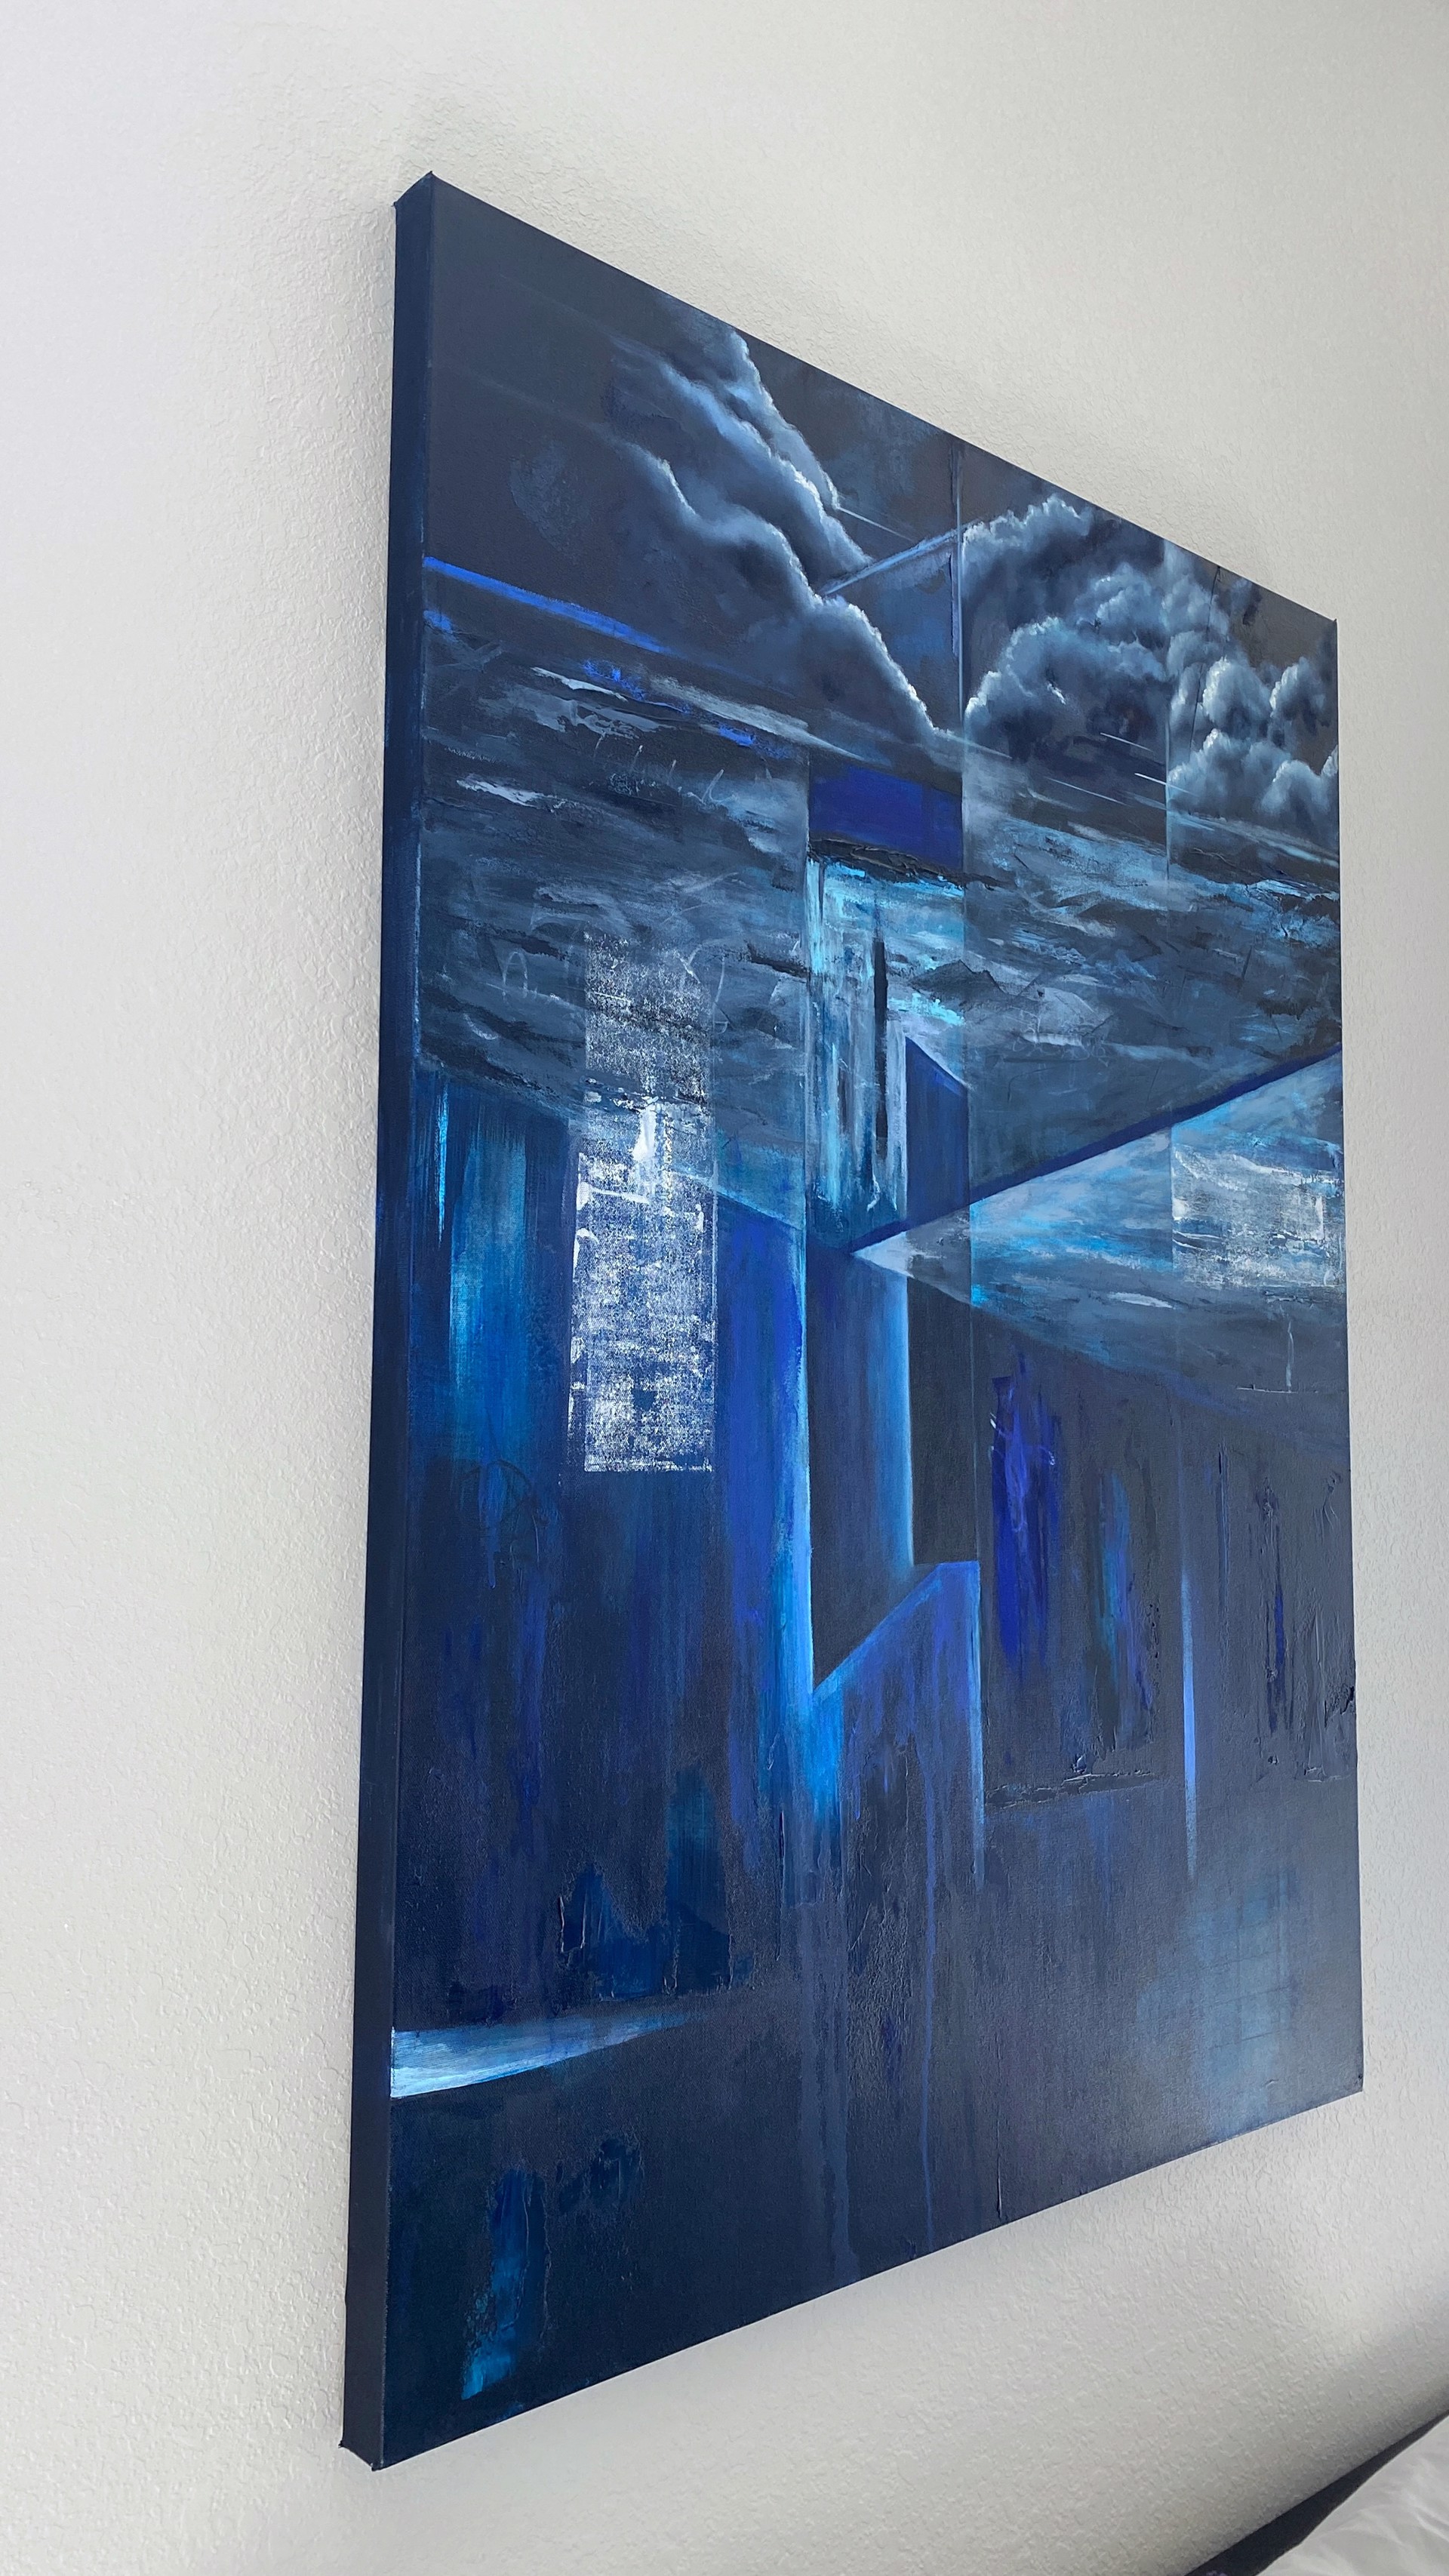 Susan Verekar - Emergence Oil on Canvas Painting - 36x48 - Blue Geometric Abstract water and sky modern painting